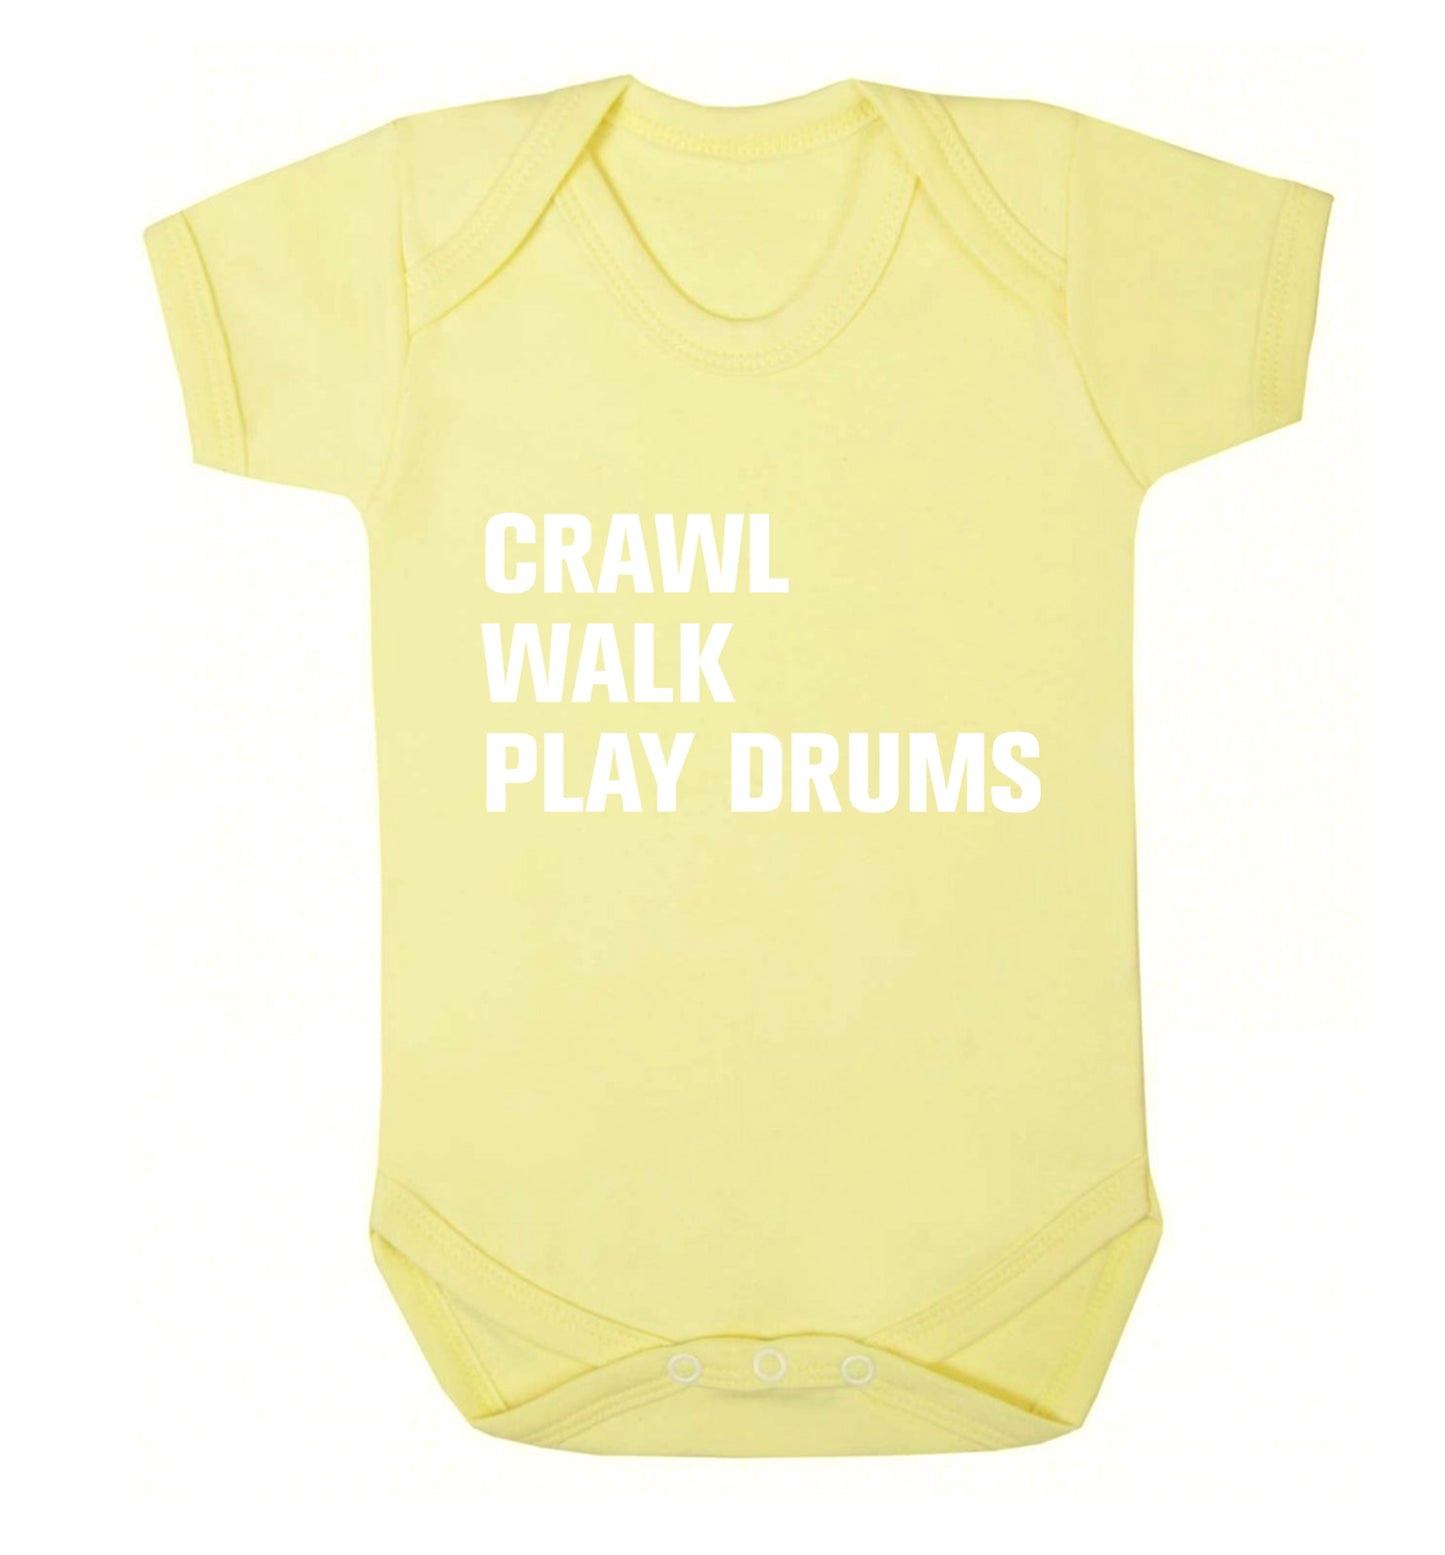 Crawl walk play drums Baby Vest pale yellow 18-24 months